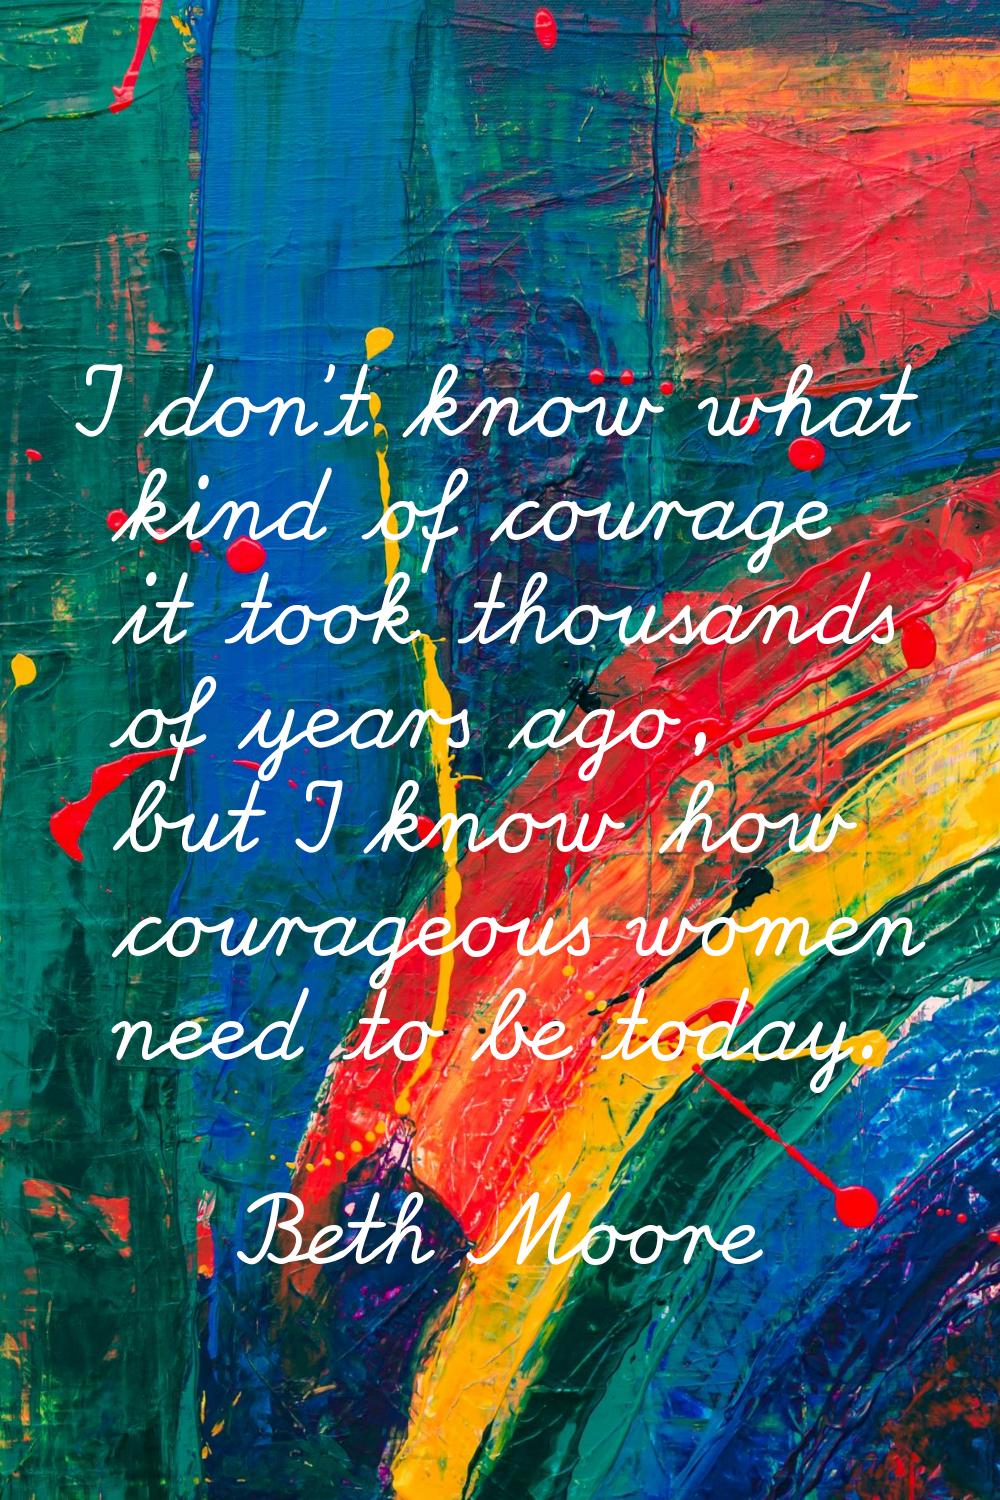 I don't know what kind of courage it took thousands of years ago, but I know how courageous women n